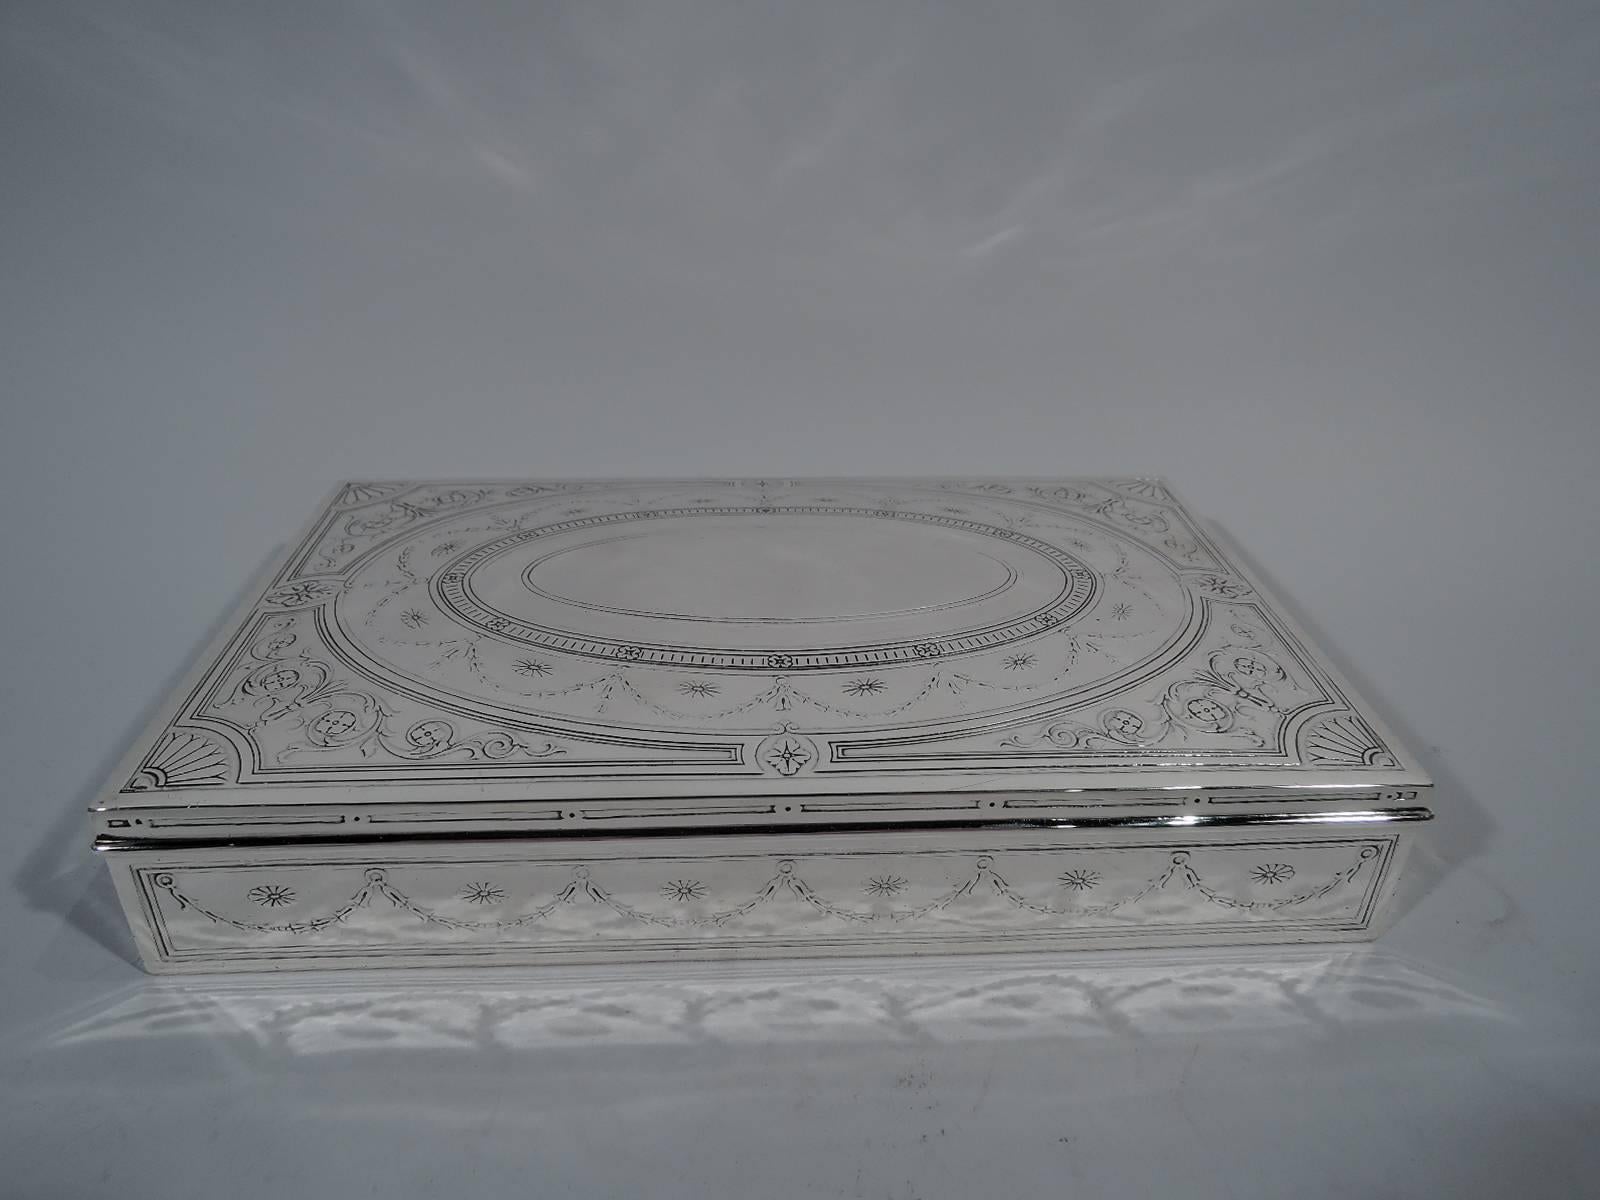 Neoclassical sterling silver desk box. Made by Tiffany & Co. in New York, circa 1913. Rectangular with curved and hinged cover. Raised ornament including garlands, dentil, and paterae on sides and cover. On cover is central oval cartouche (vacant).